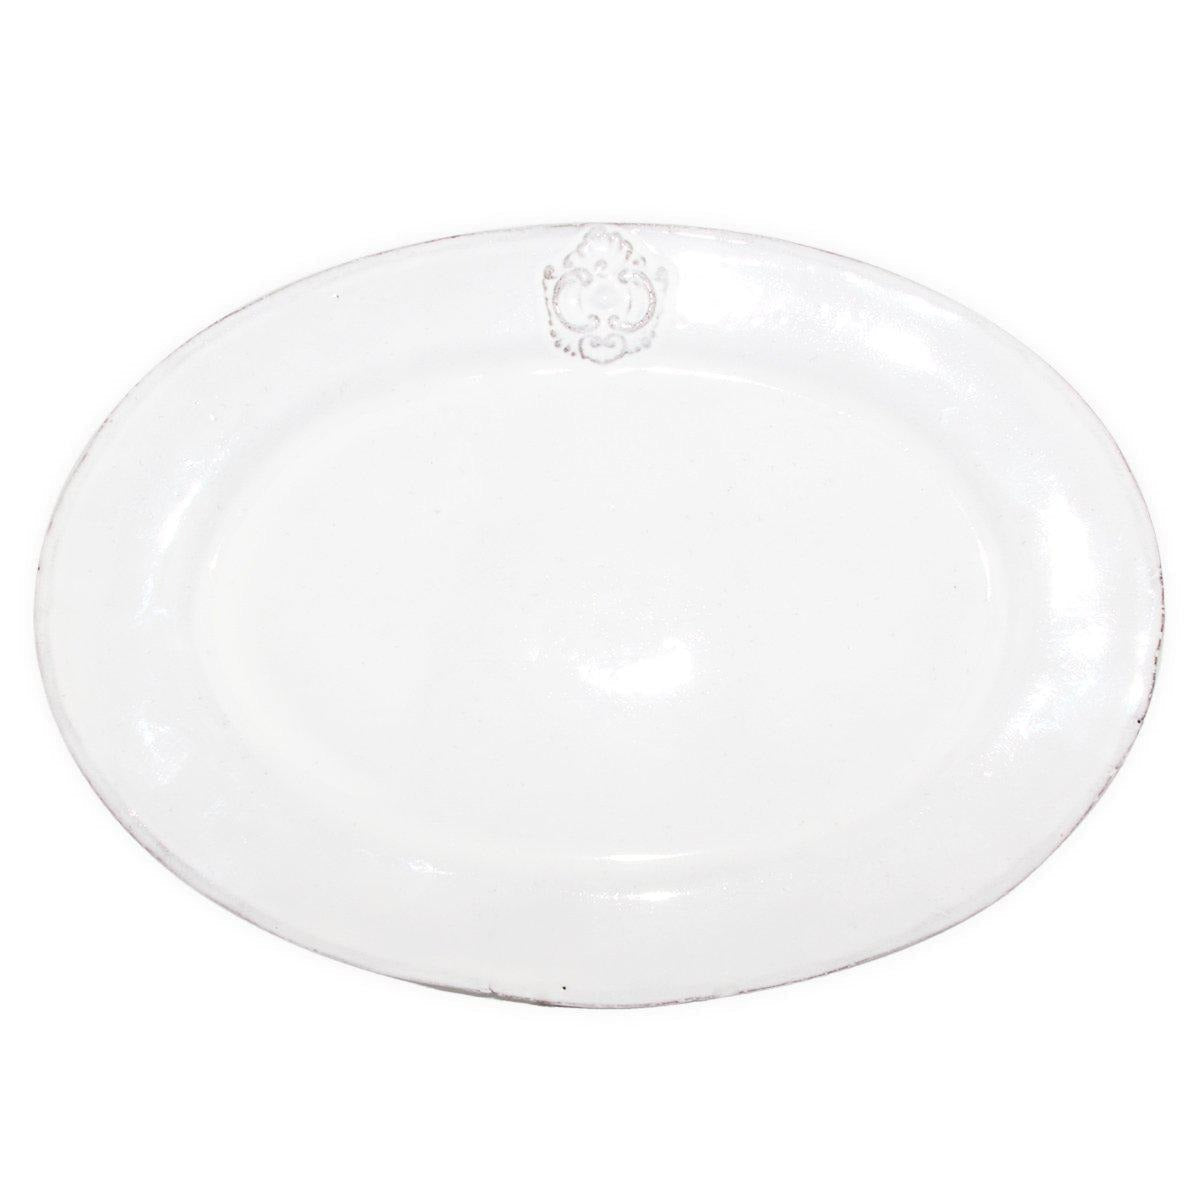 Charles oval platter-L (33x23,5x2cm)-Handmade in France by CARRON